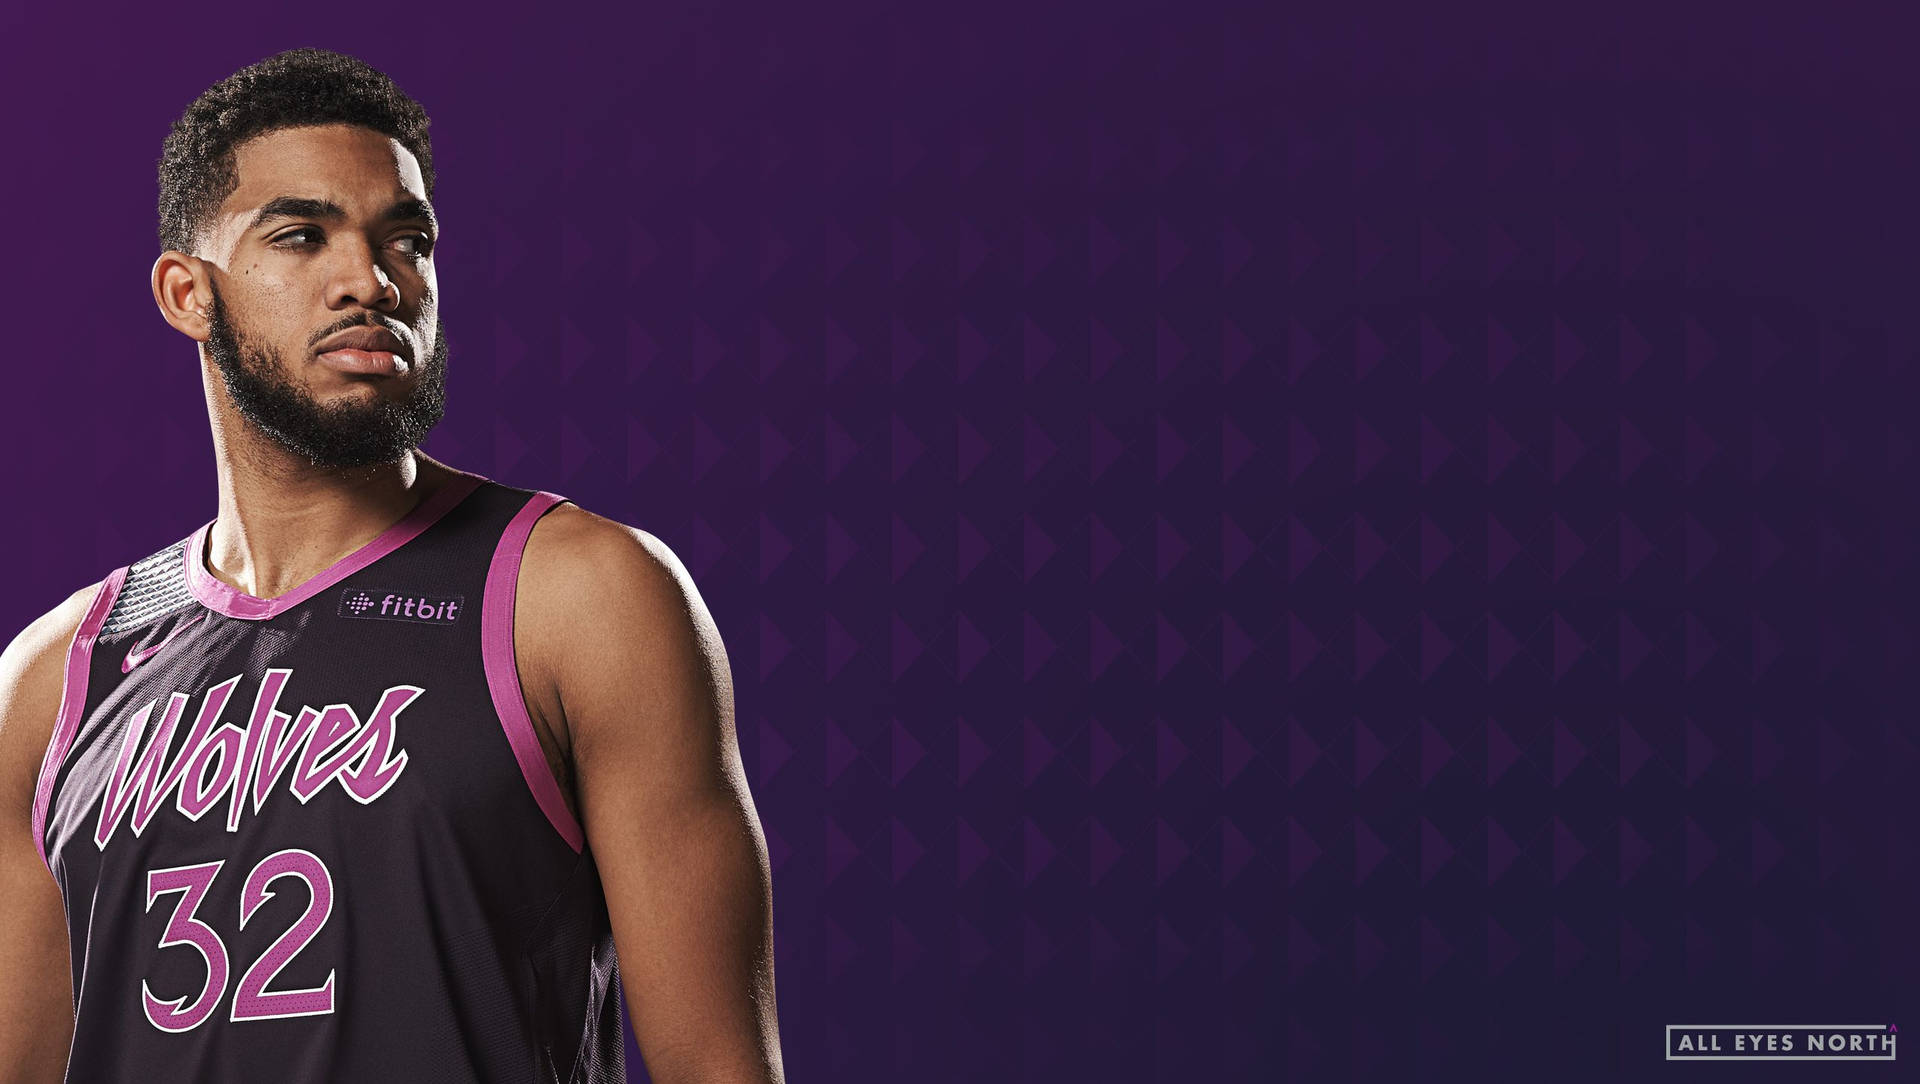 Karl-anthony Towns Wolves Purple Jersey Background